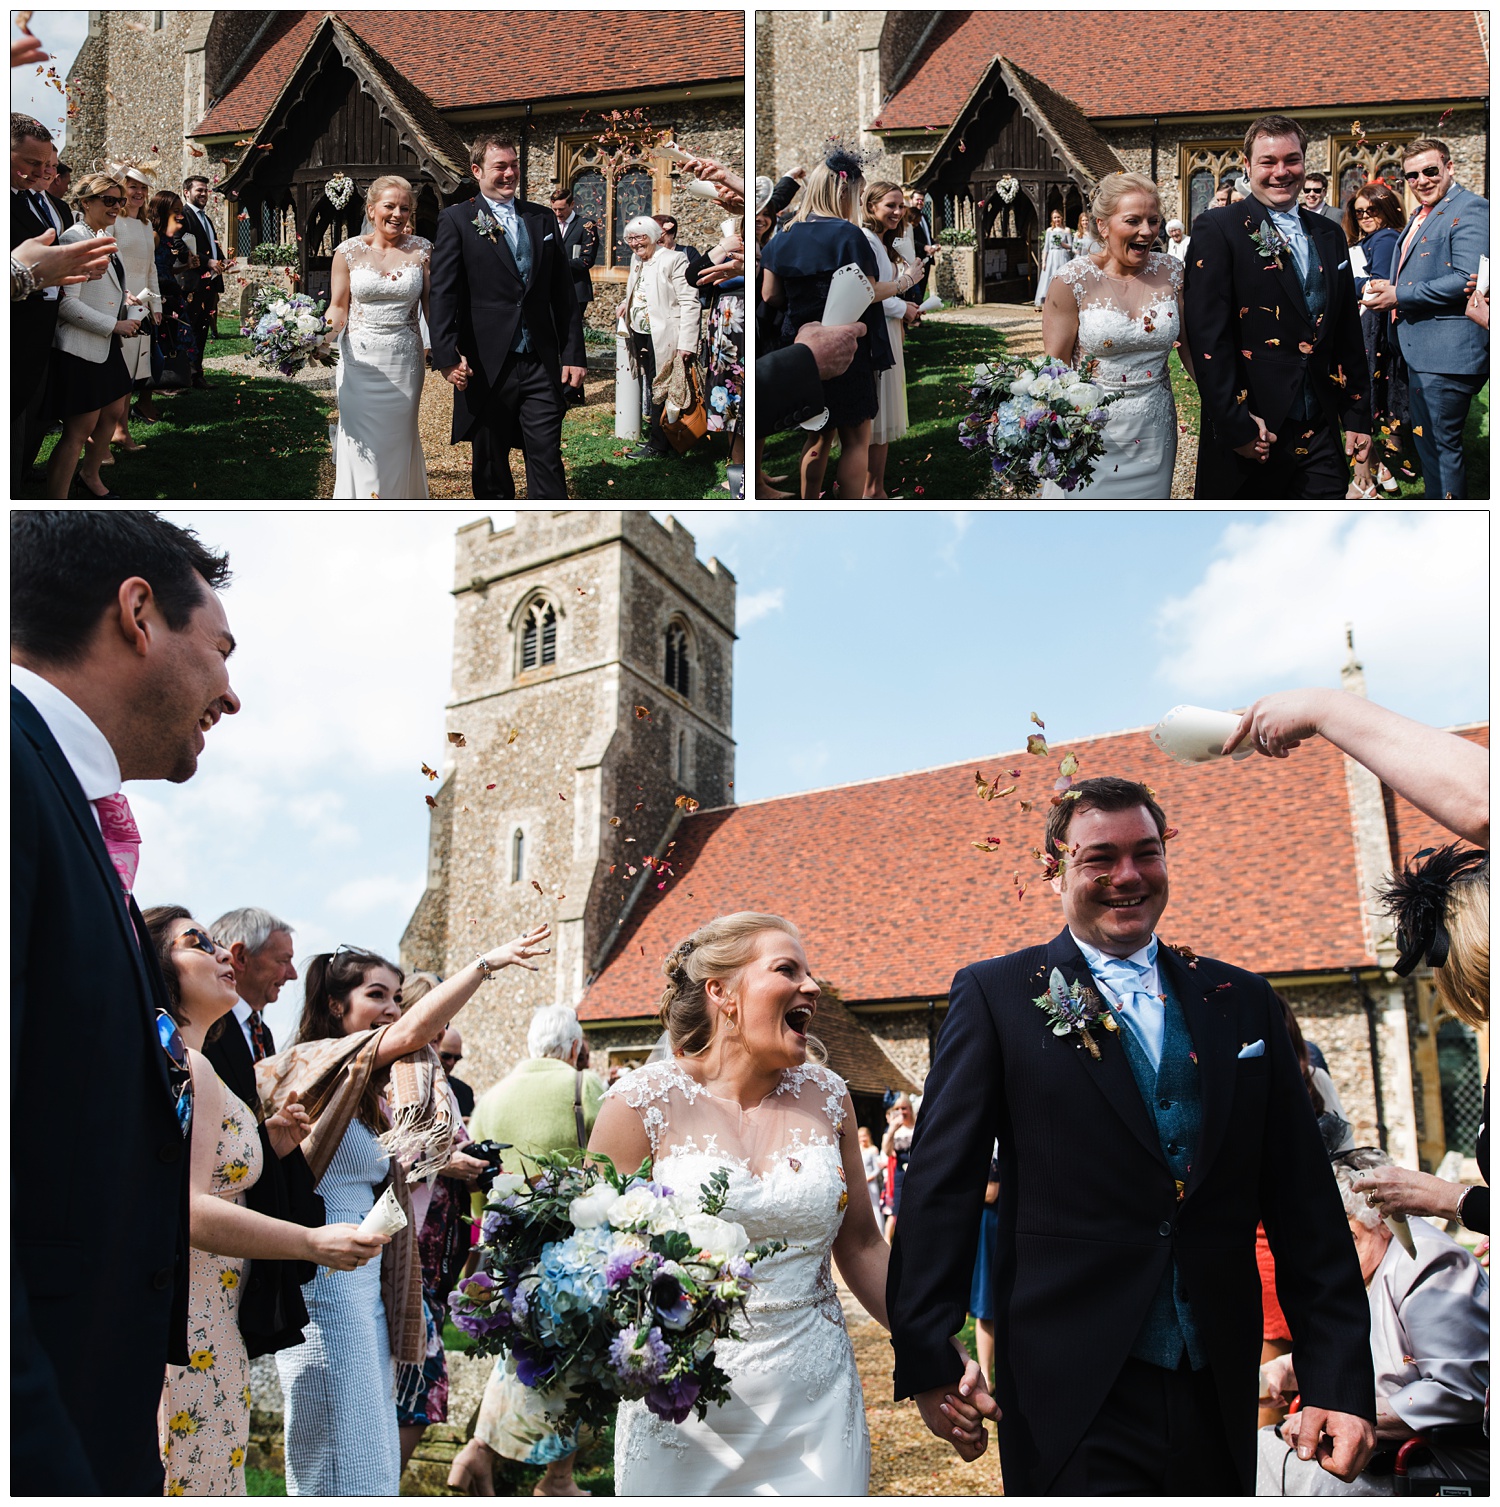 Bride and groom leave St Christopher's Church in Willingale near Chelmsford. People throw confetti at them.